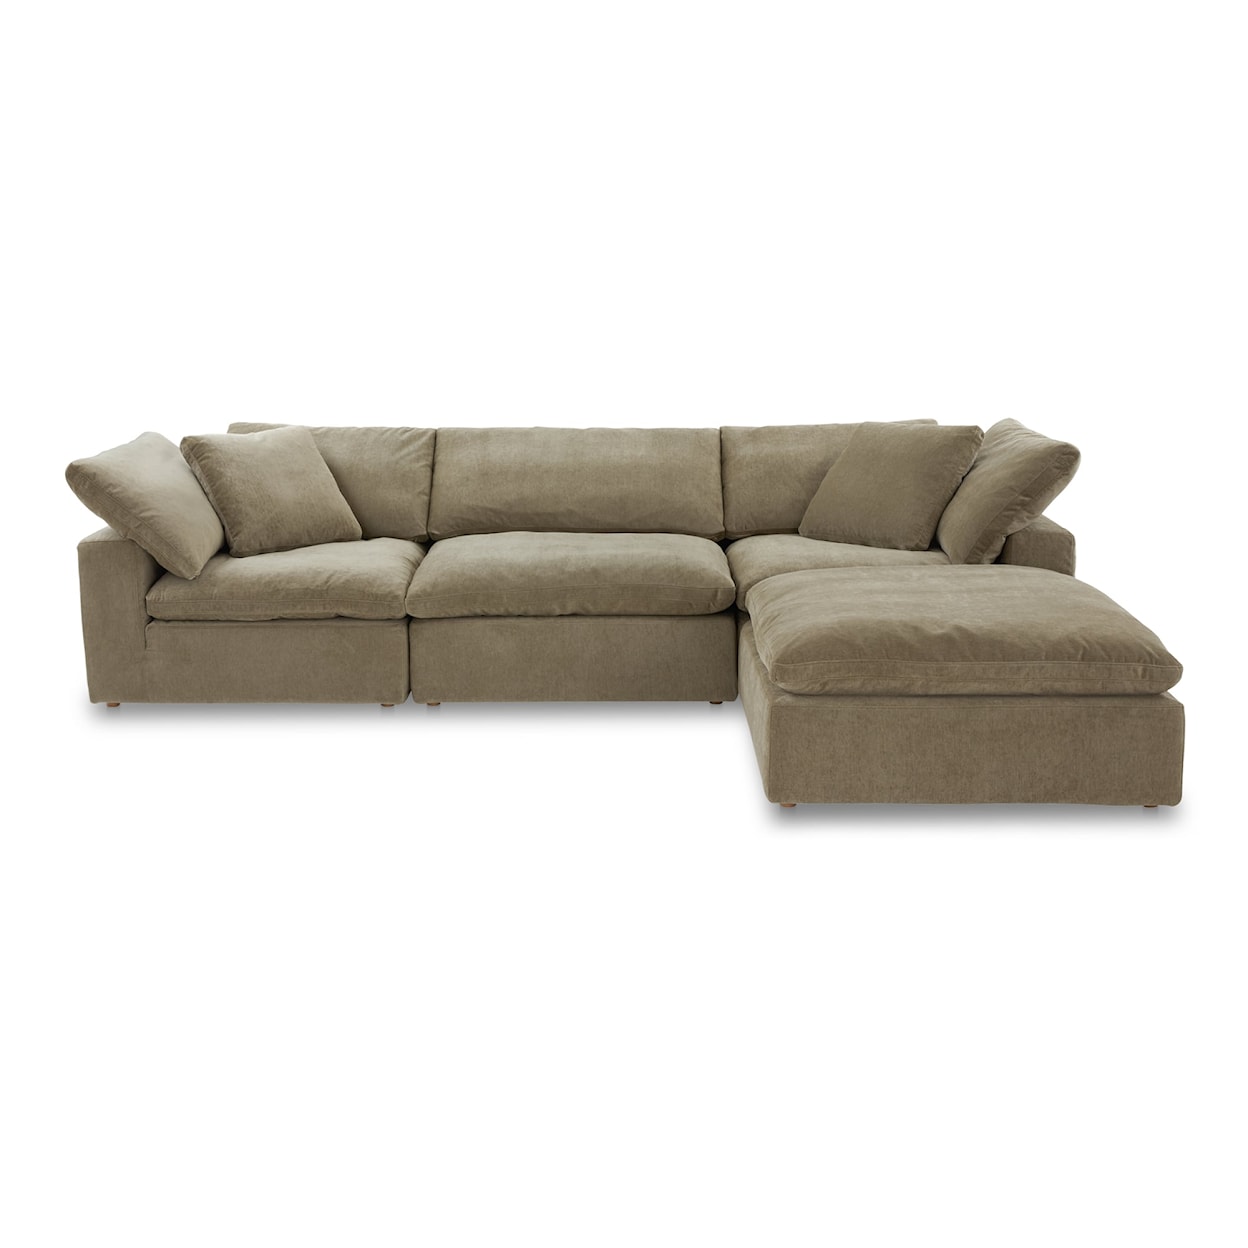 Moe's Home Collection Terra Dream Sectional Sofa